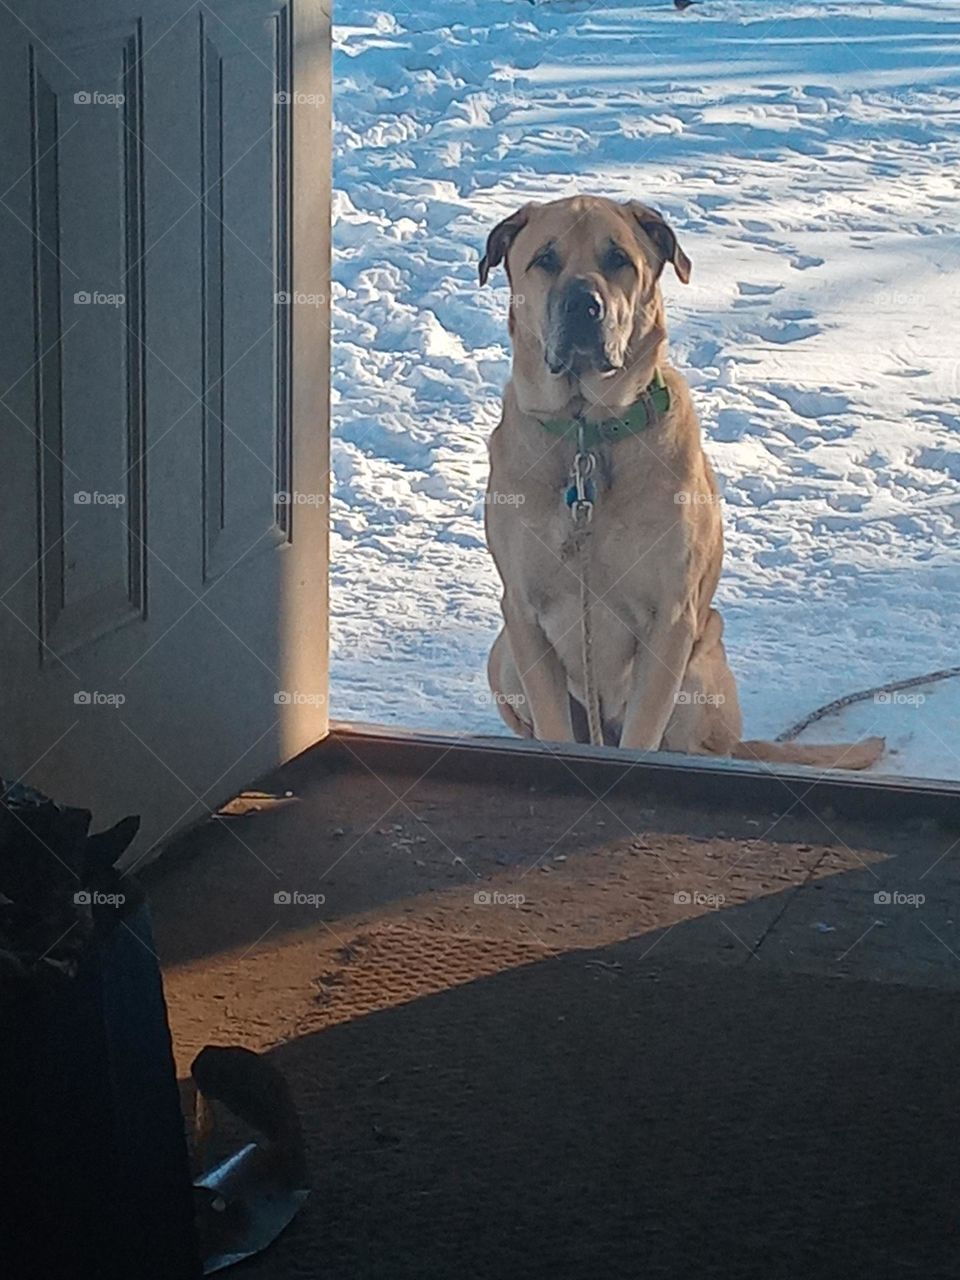 handsome boy was enjoying his snow day can you come out and play it'll be fun I promise!